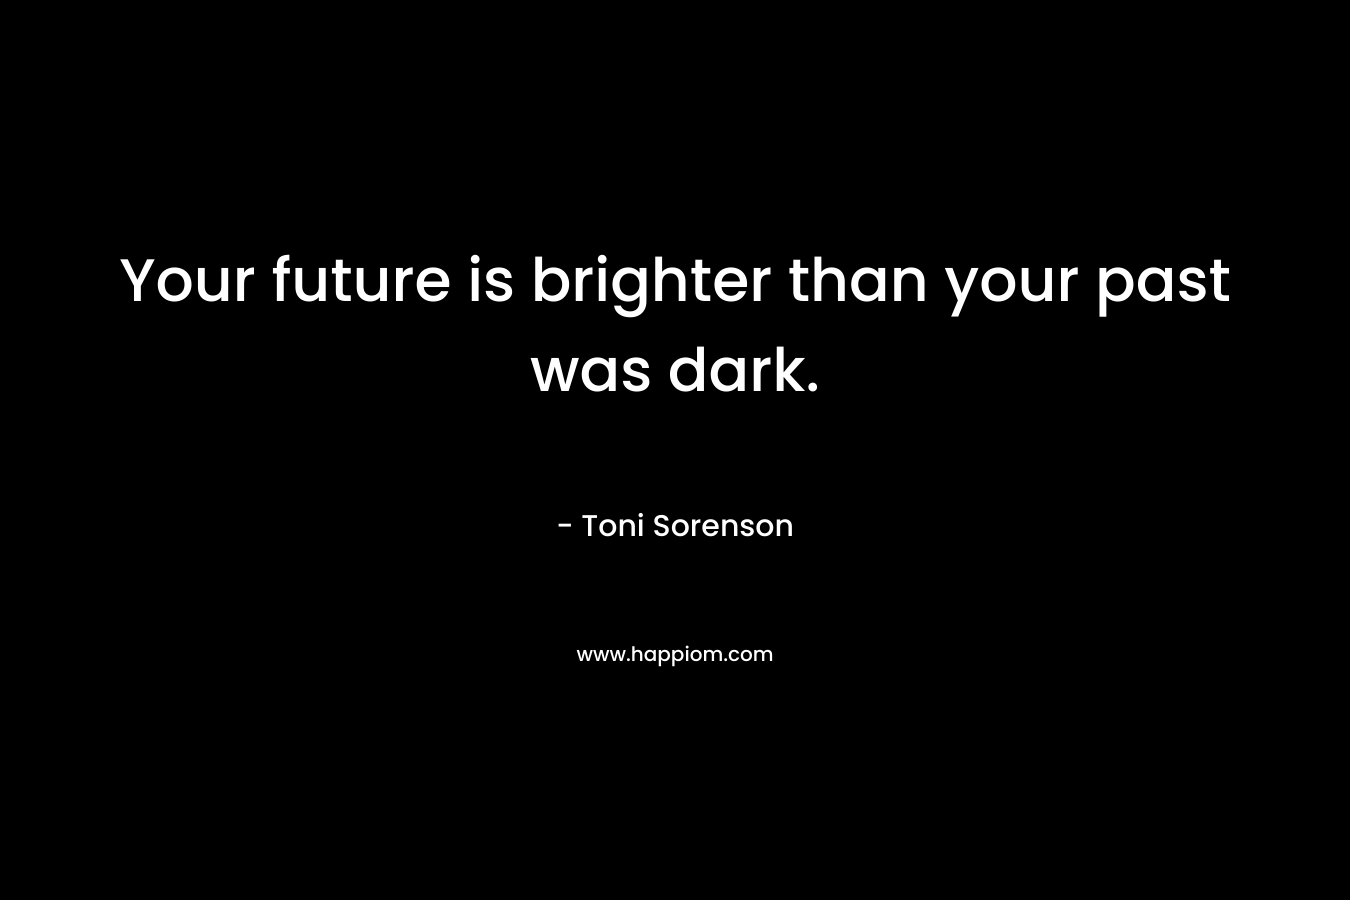 Your future is brighter than your past was dark.